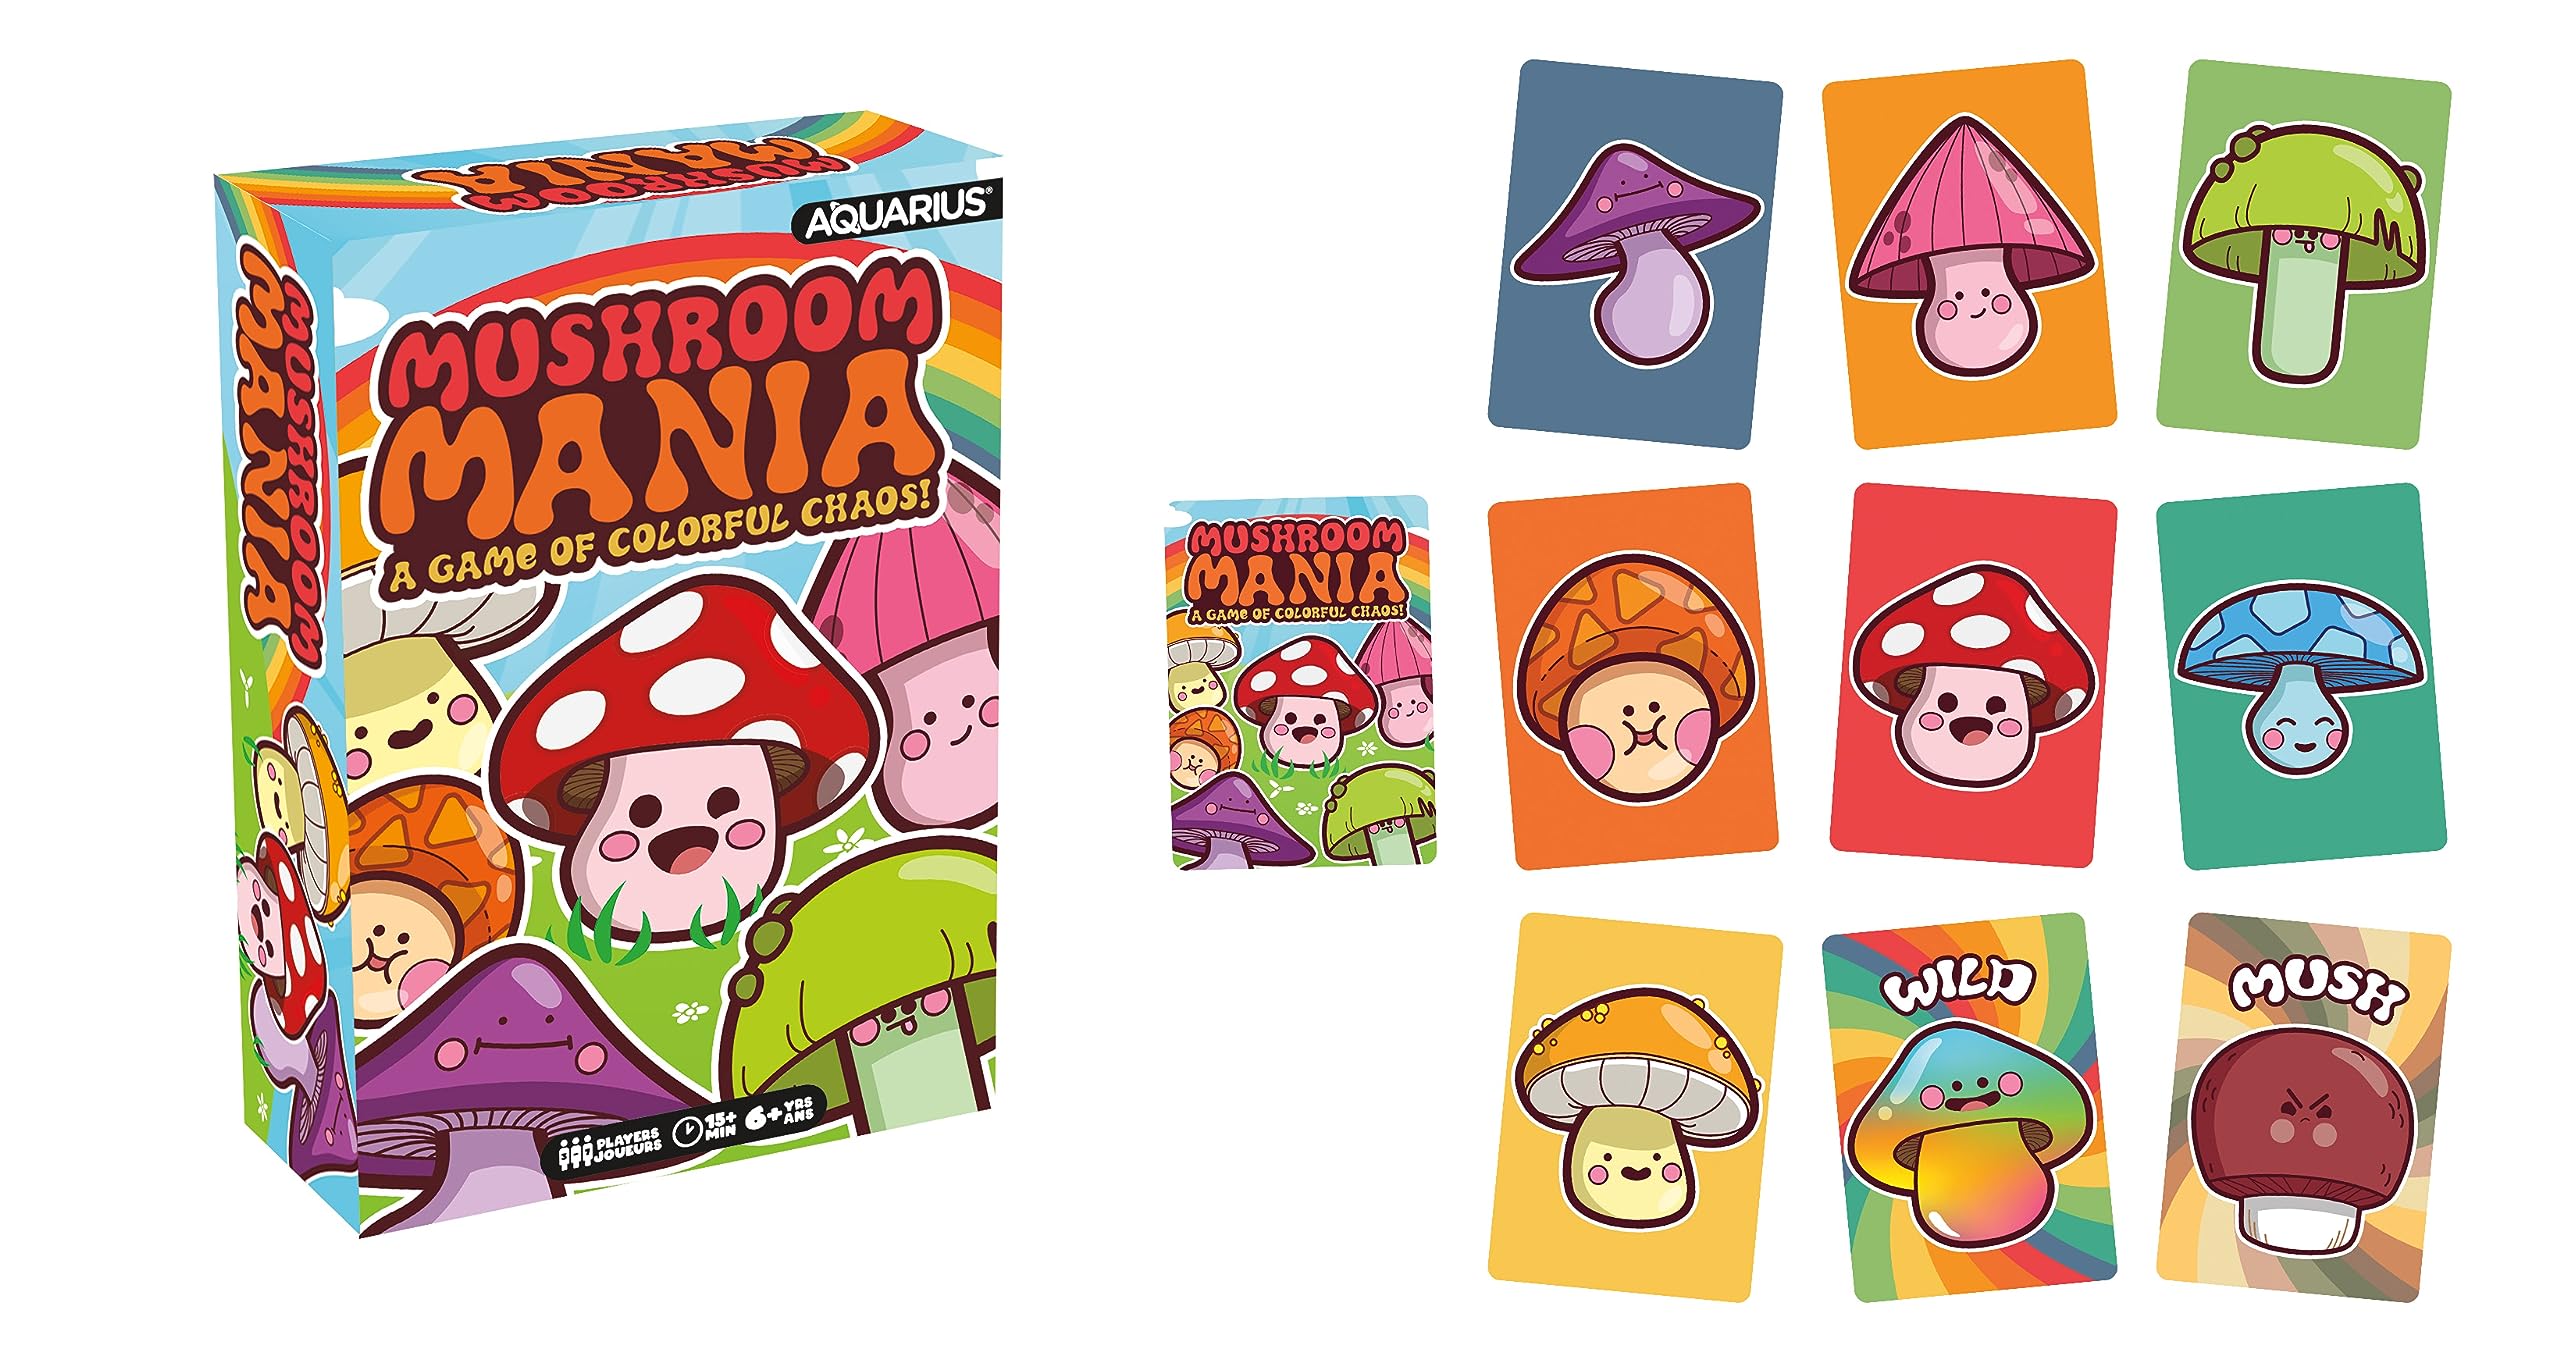 AQUARIUS Mushroom Mania Card Game - Mushroom Mania Card Game - Great Family Fun - Ages 6+ - Officially Licensed for Fun - Mushroom Mania Card Game - Merchandise & Collectibles